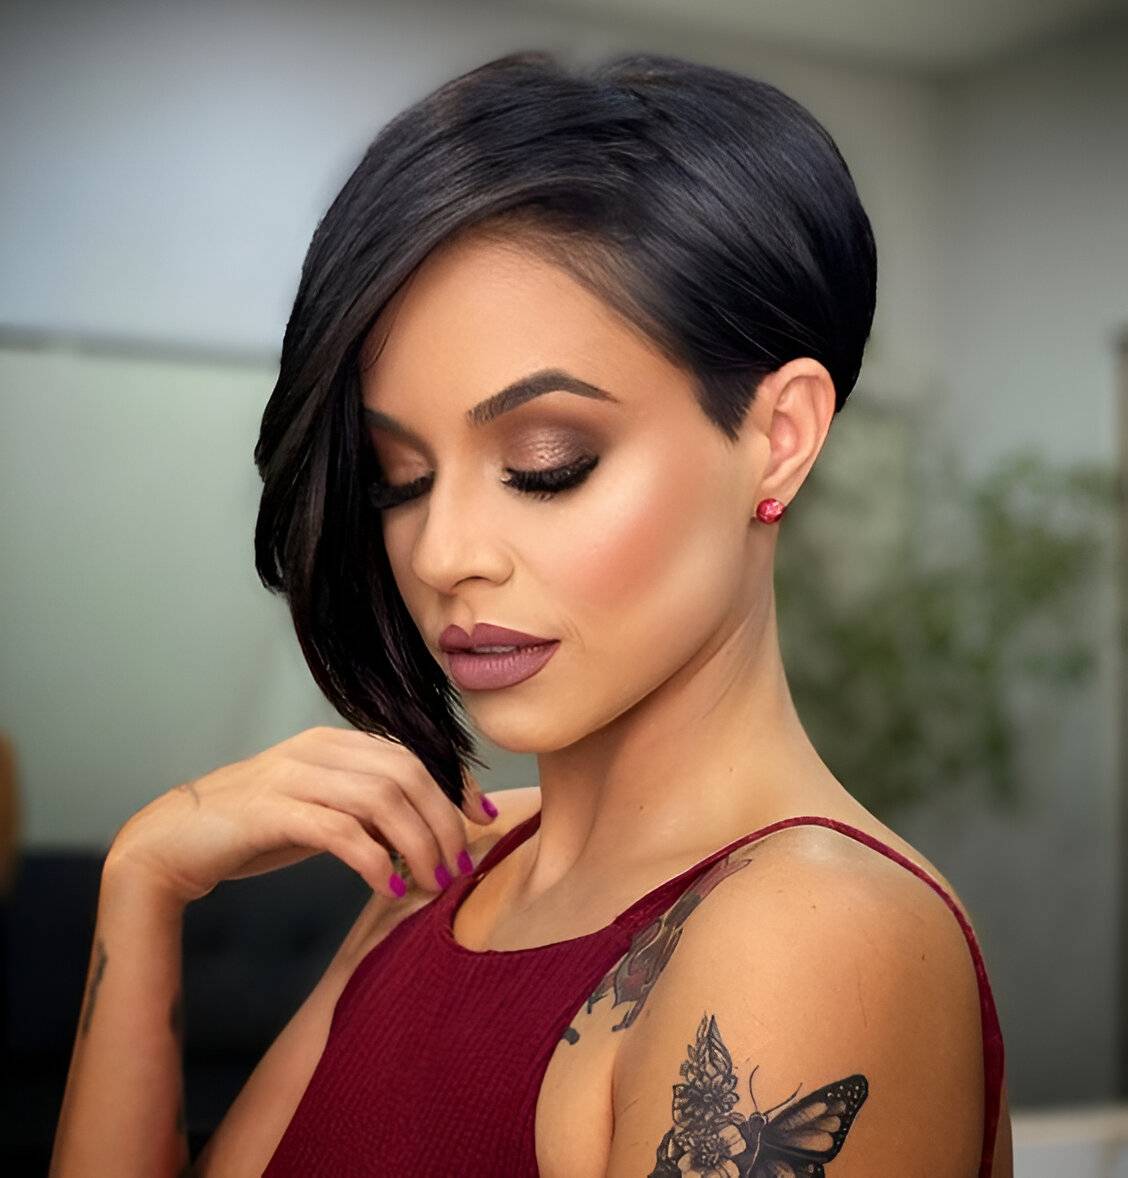 25 Trendiest Short Asymmetrical Haircuts For A Cool Chic Look - 163